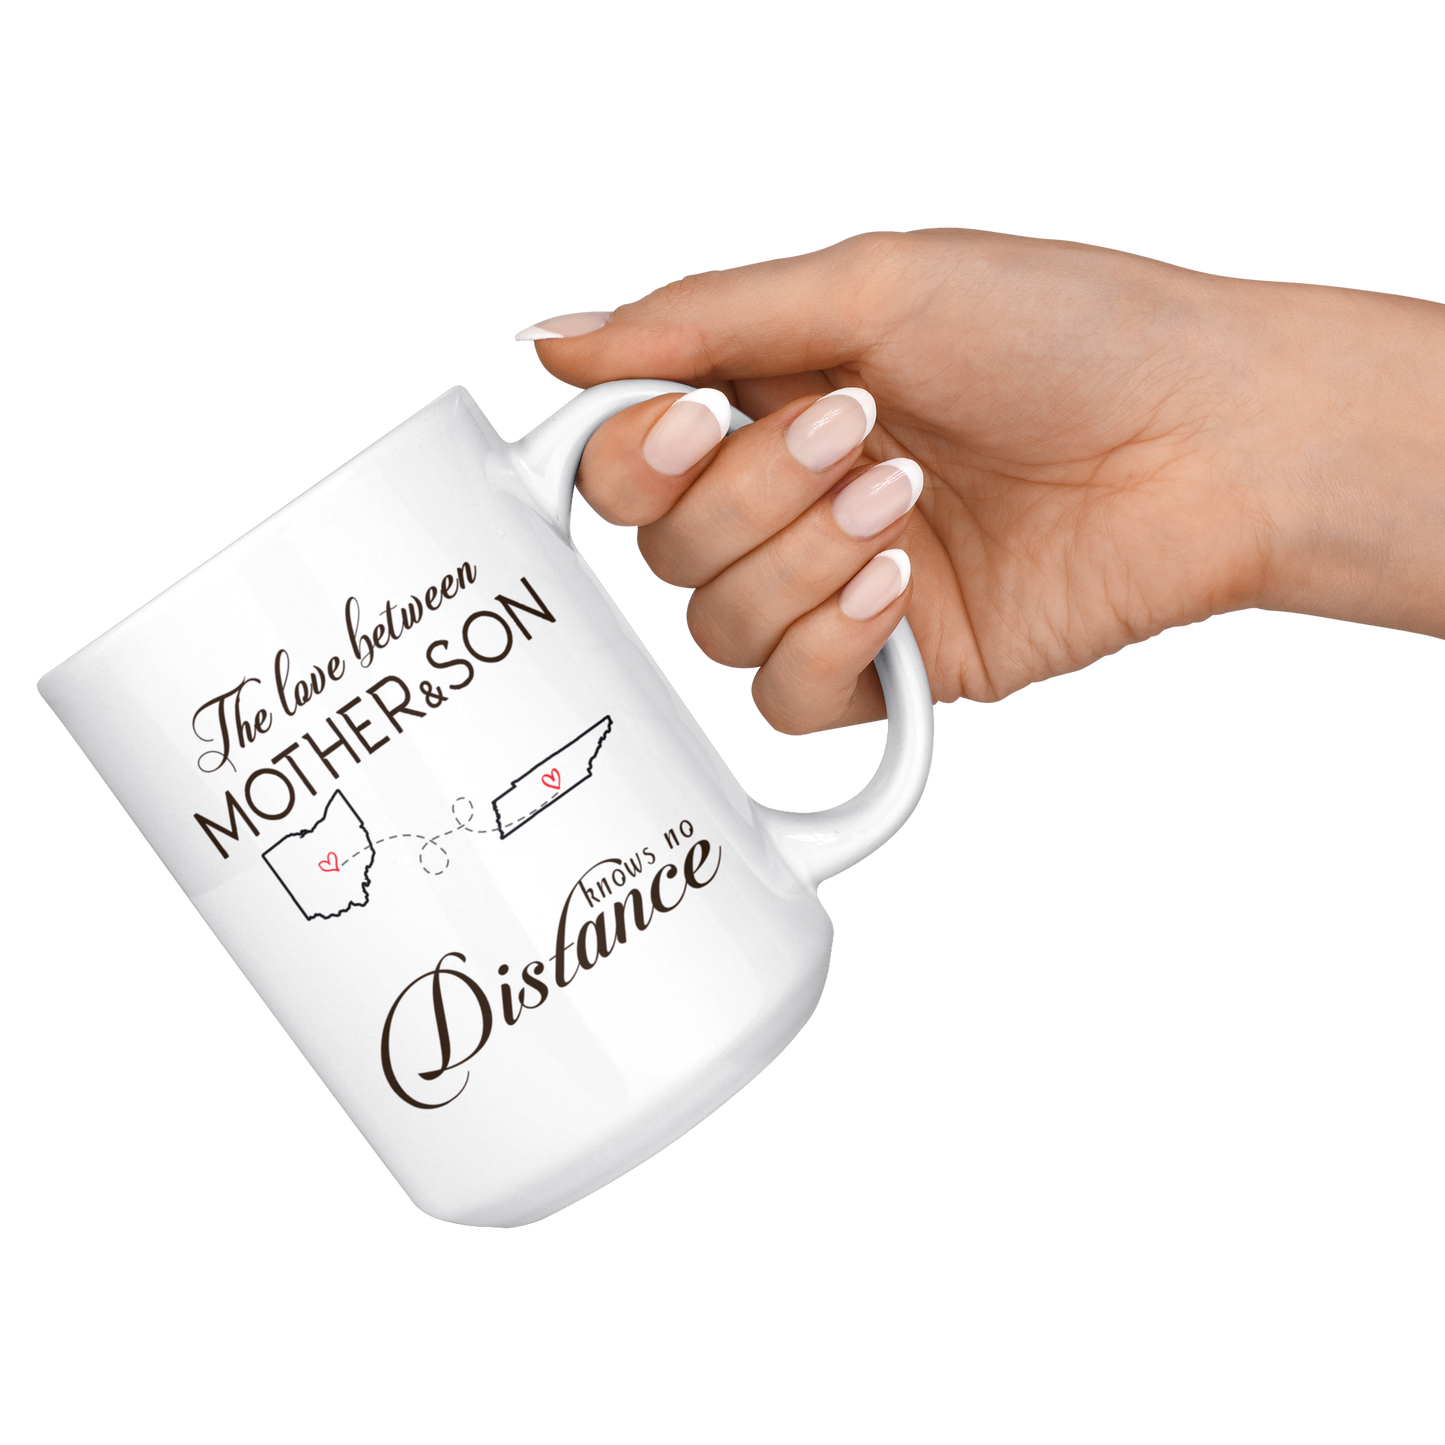 ND20604809-15oz-sp-24273 - [ Ohio | Tennessee ]Long Distance Mug 15 oz Ohio Tennessee - The Love Between Mo